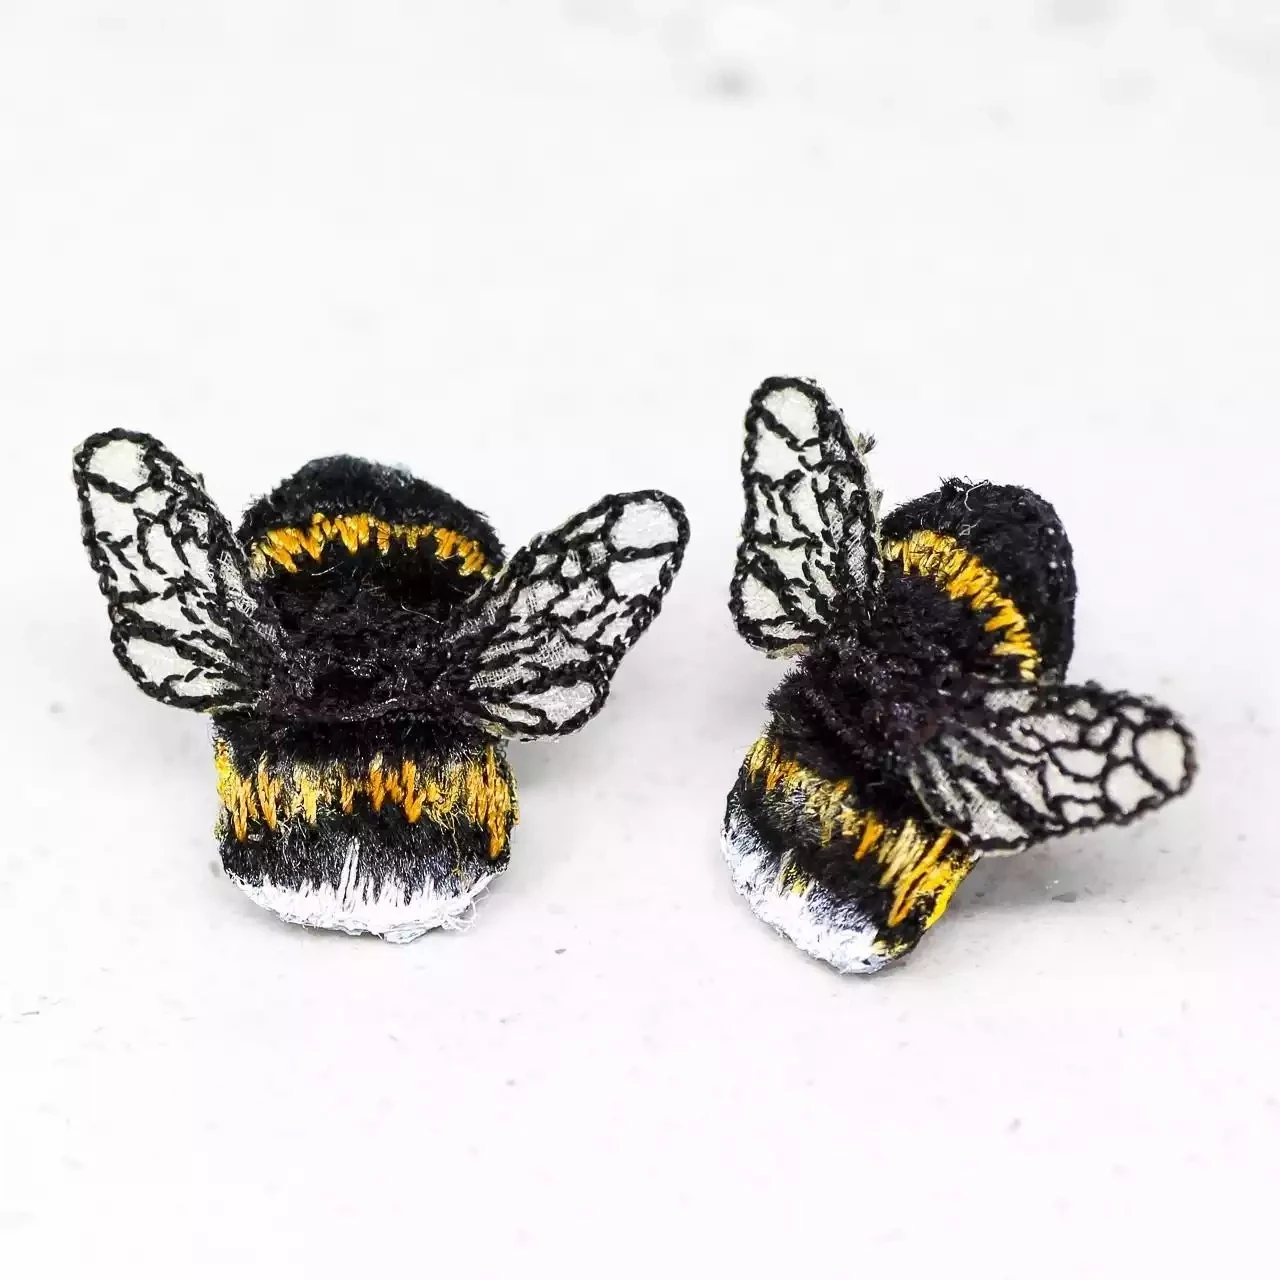 Hand Painted and Embroidered Fabric Stud Earrings - White Tail Bumble Bee by Vikki Lafford Garside